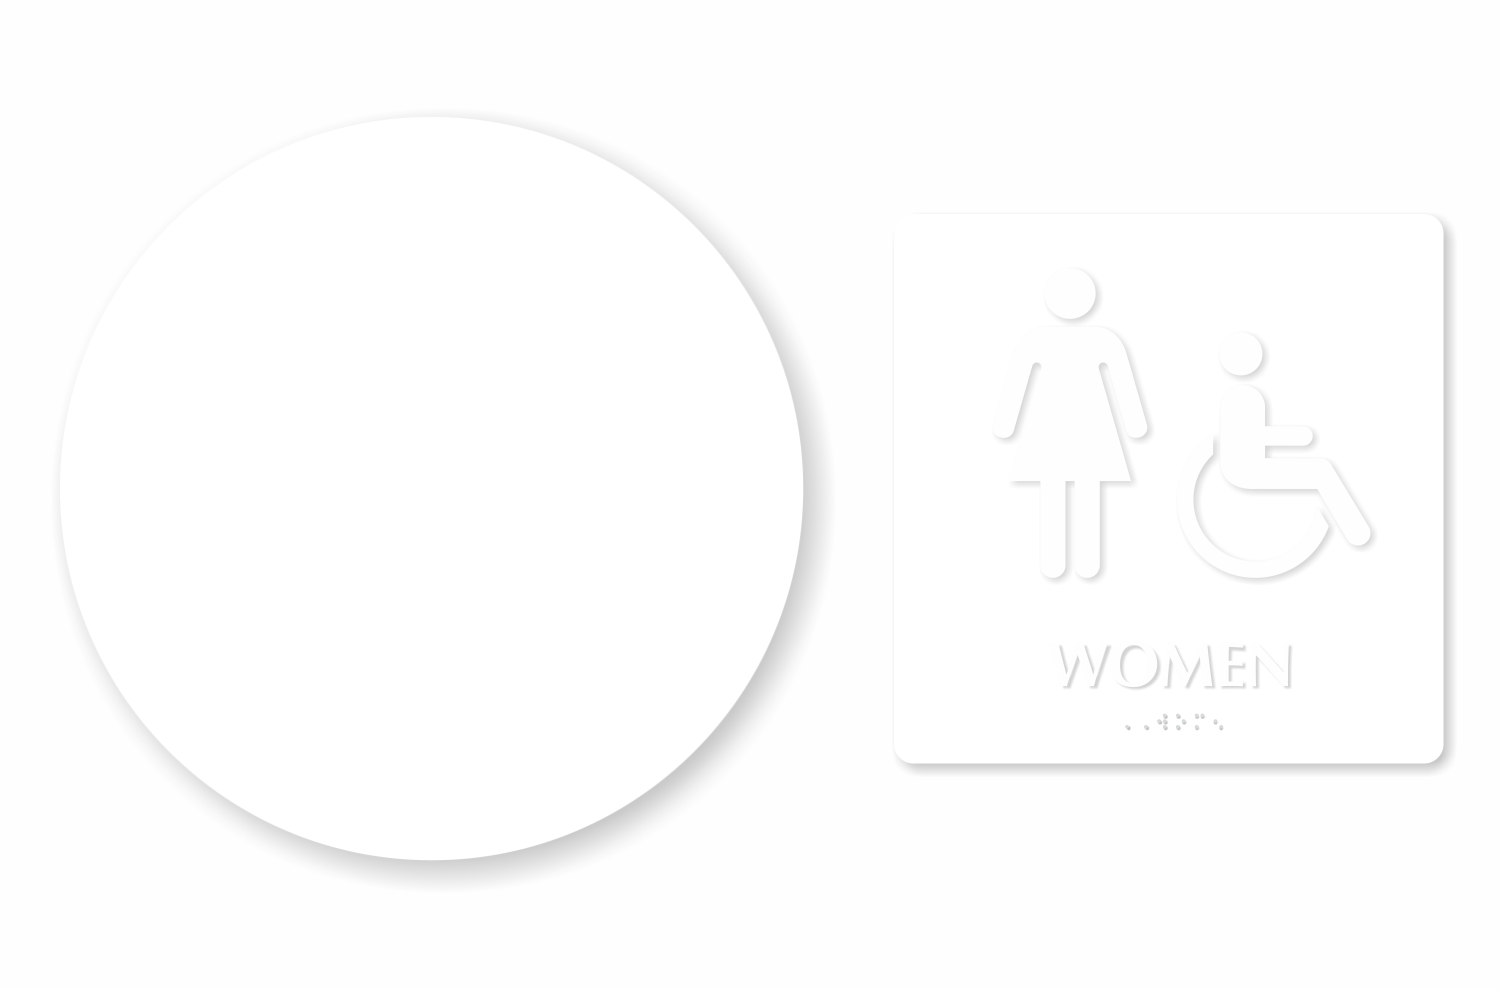 Accessible Women Pictogram Sign